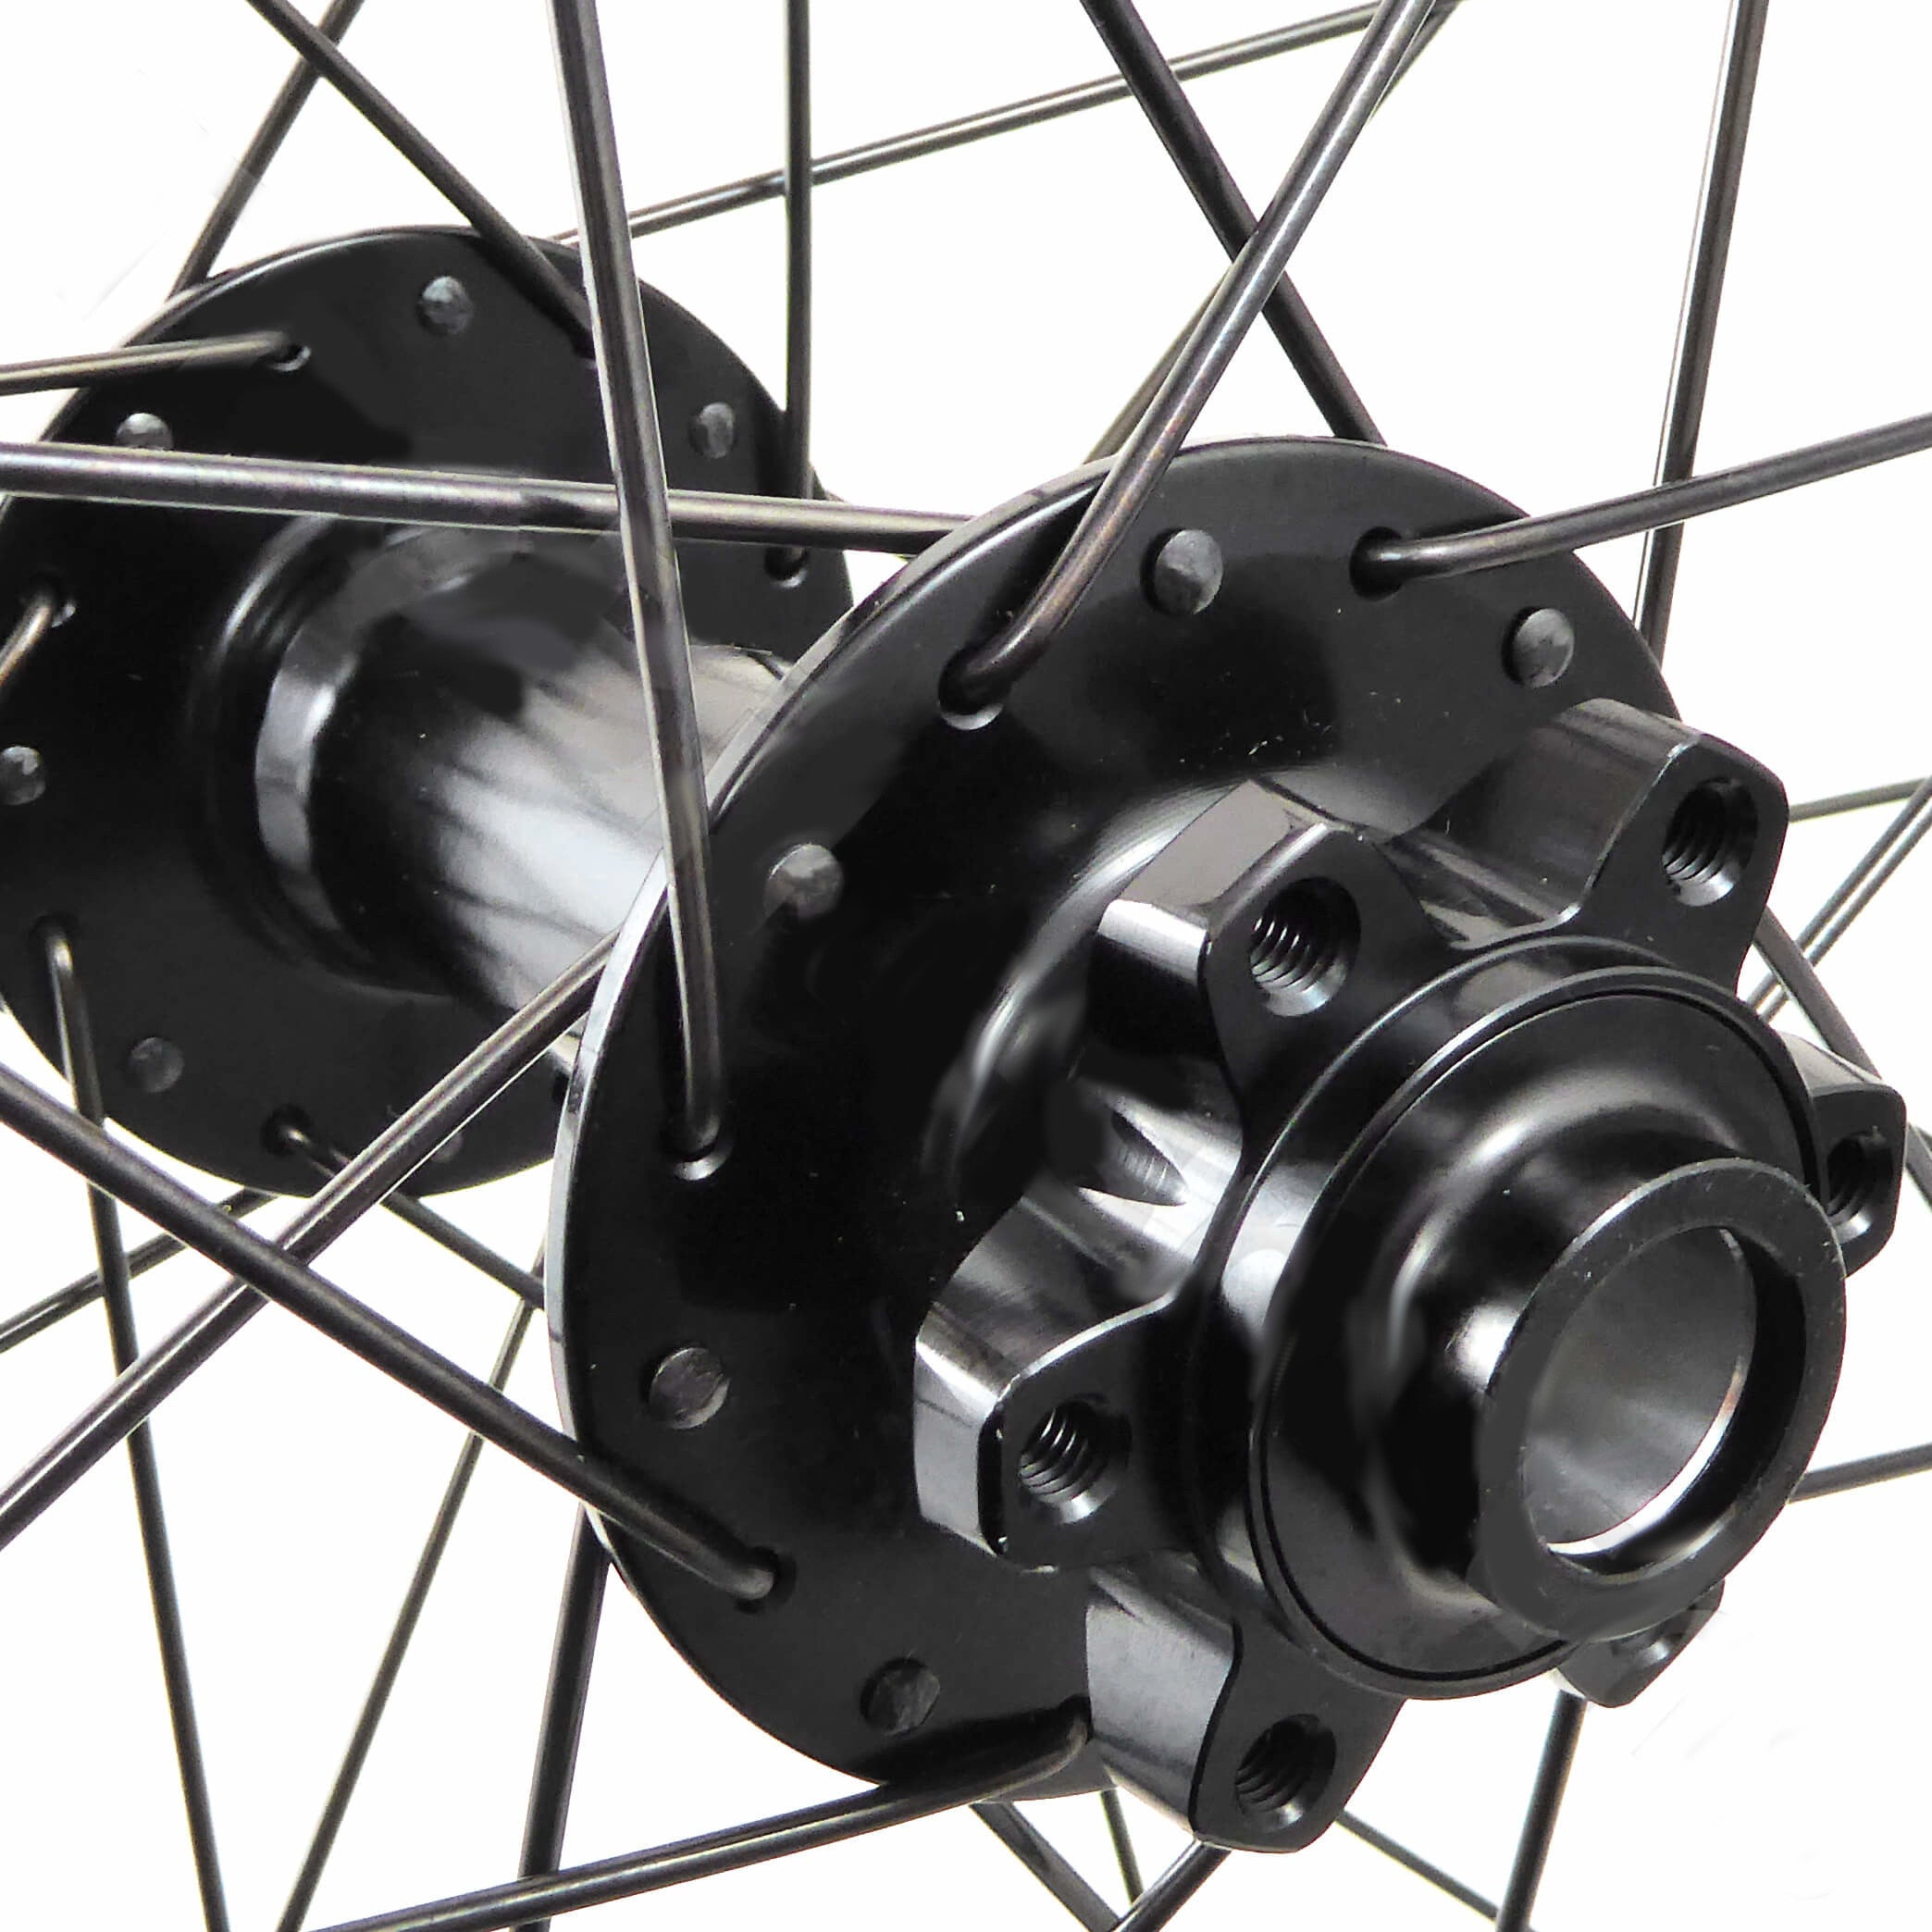 Closeup of the hub showing the mounting bolts for the disc brake as well as the thru axle hole.